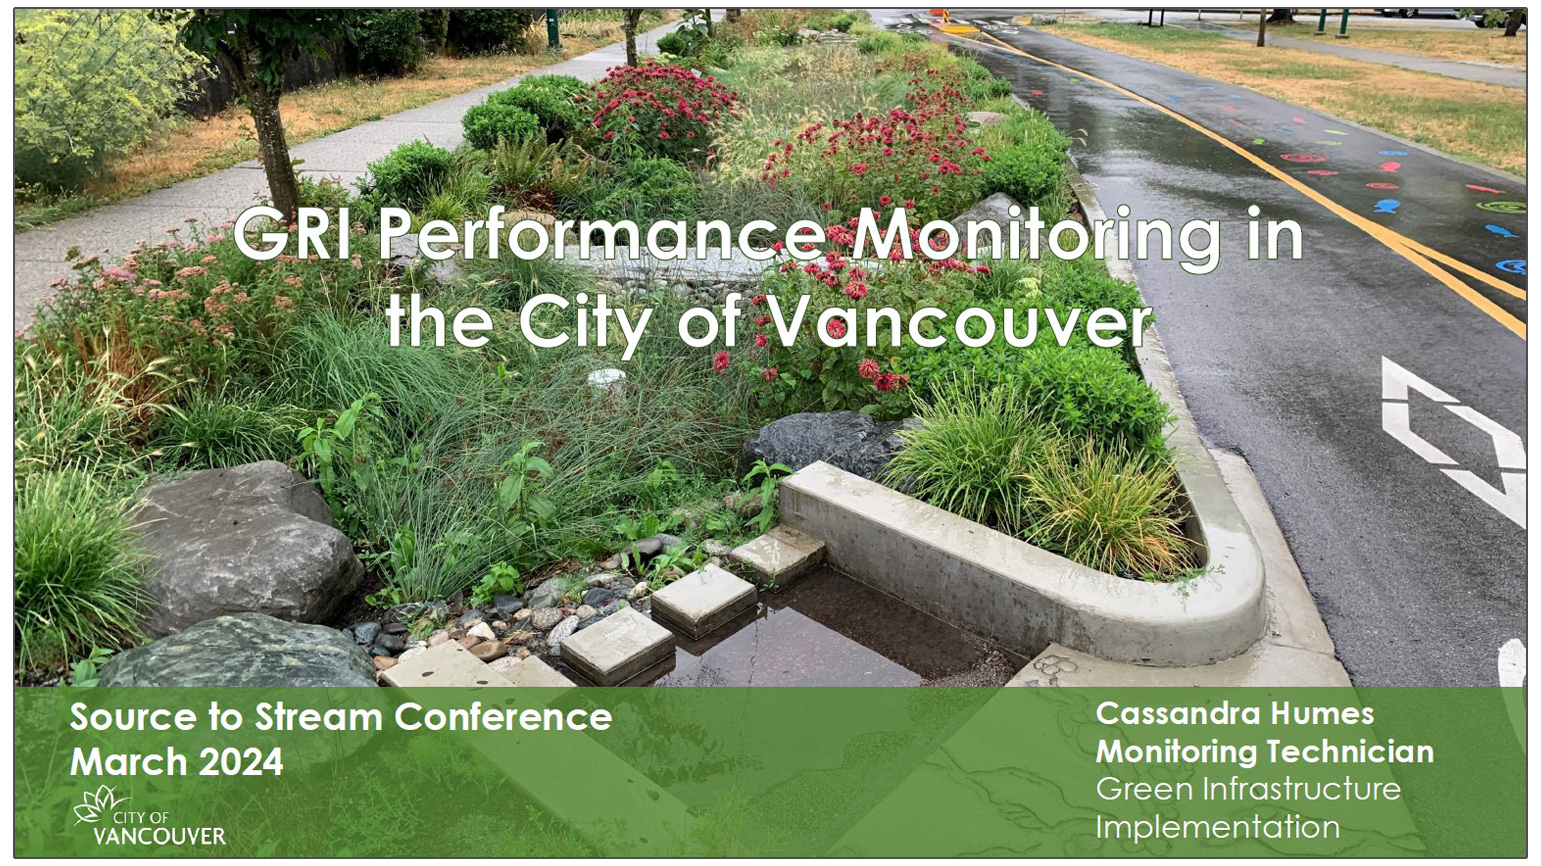 Green Rainwater Infrastructure Performance Monitoring in the City of Vancouver - presentation by Cassandra Humes